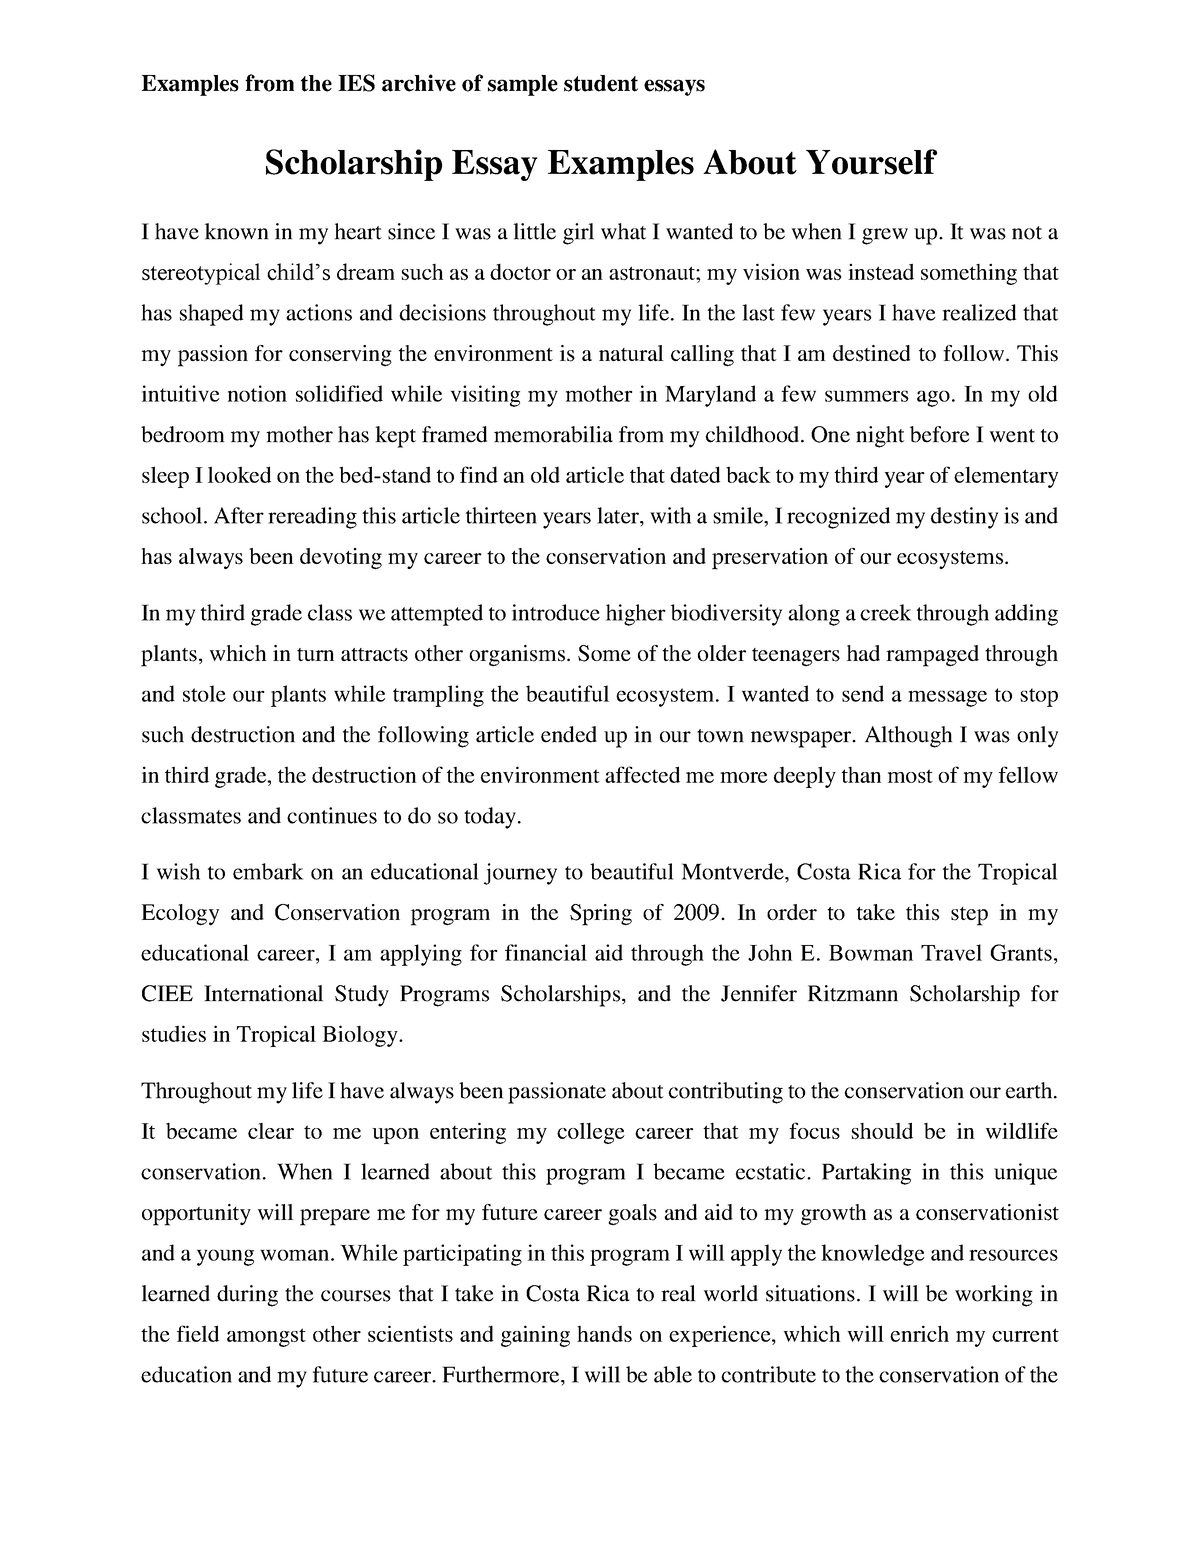 tell us about yourself scholarship essay example